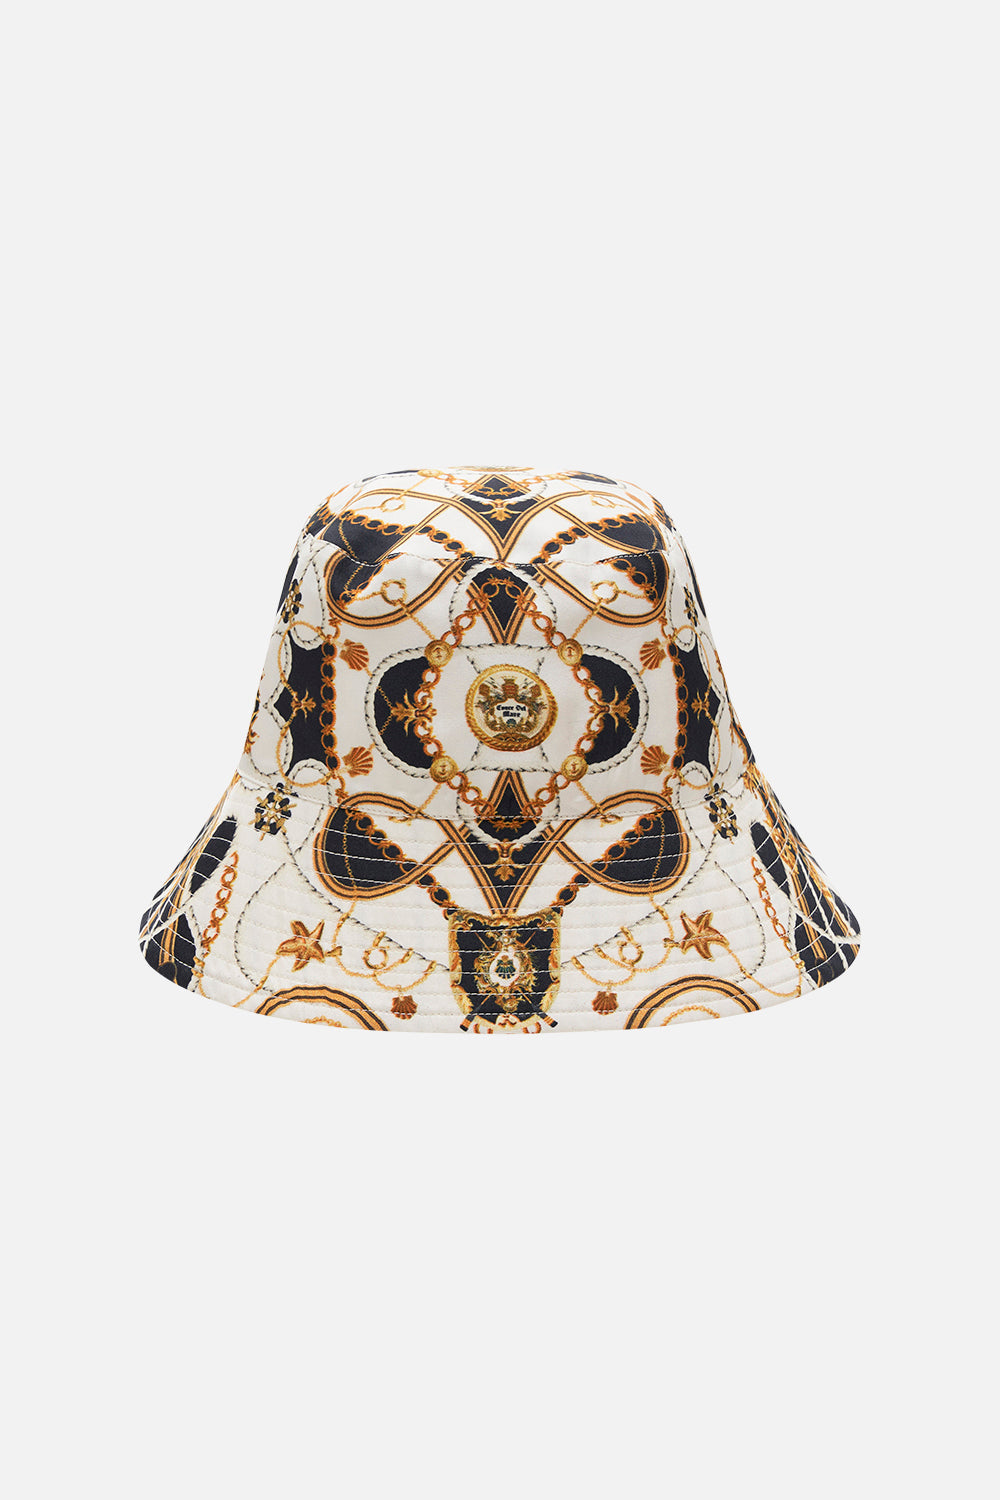 Product view of CAMILLA bucket hat in Sea Charm print